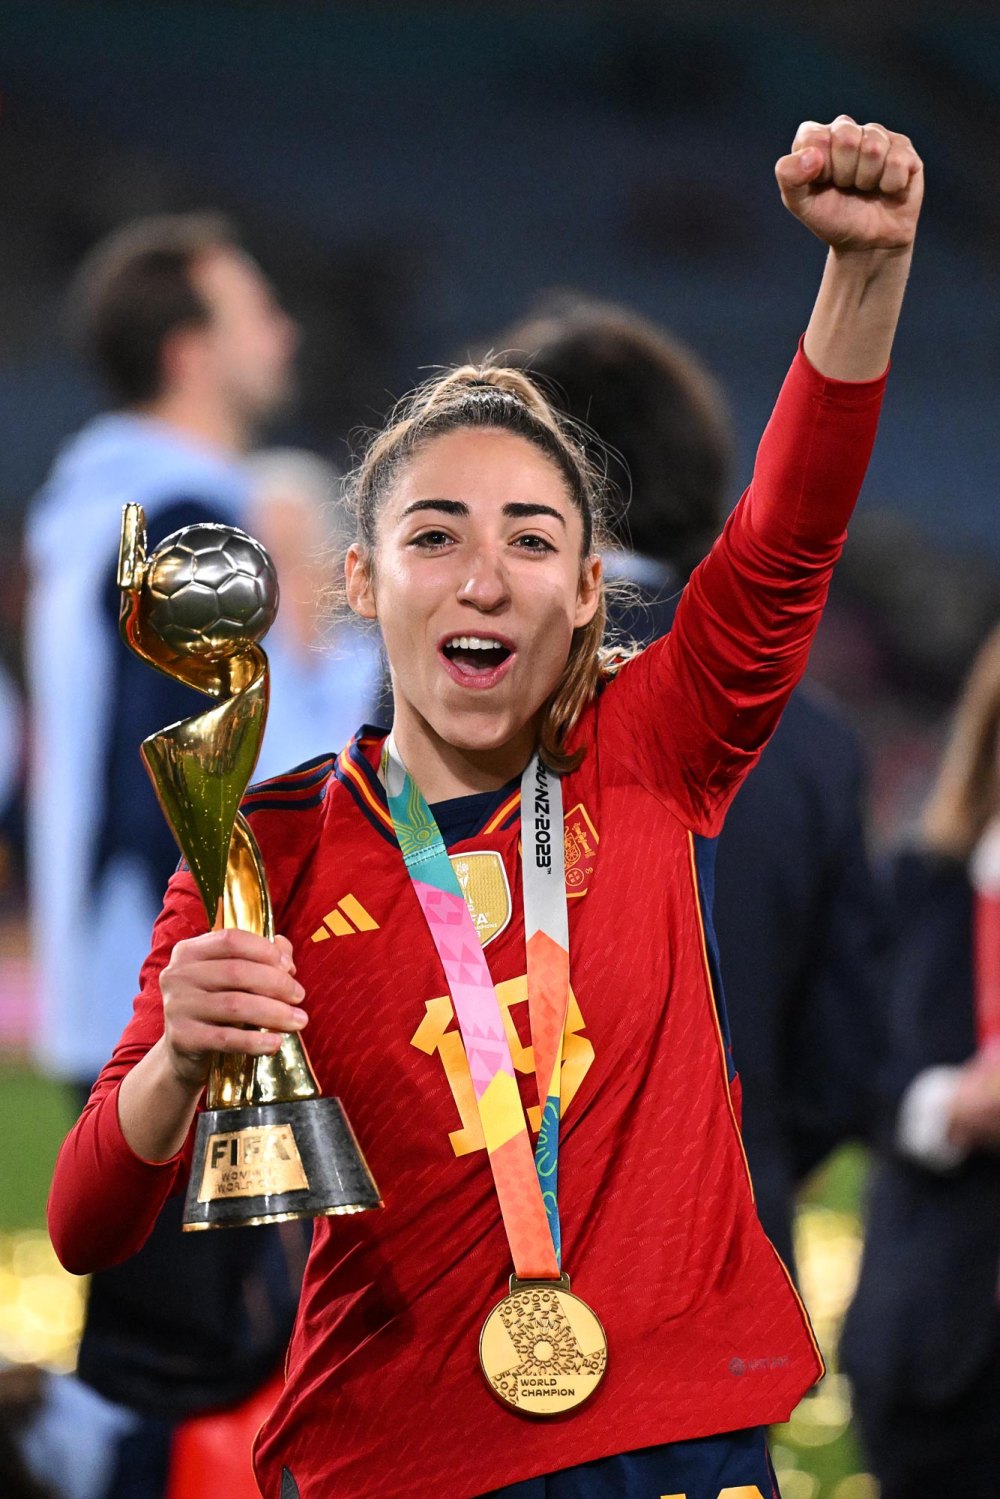 Spain s Winning World Cup Scorer Olga Carmona Learns of Dad s Death Hours After Victory 423